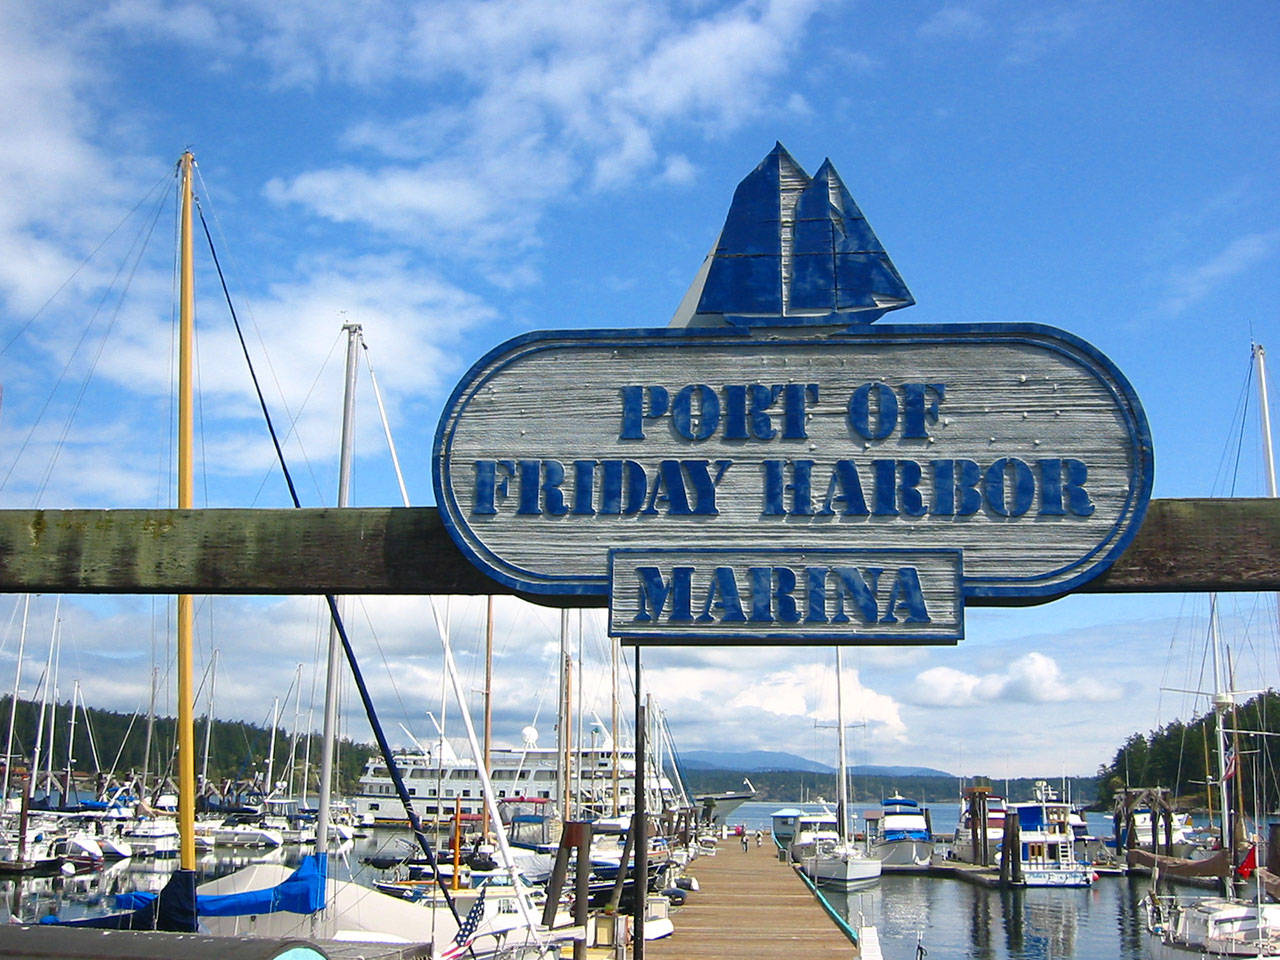 Port of Friday Harbor meeting on June 28